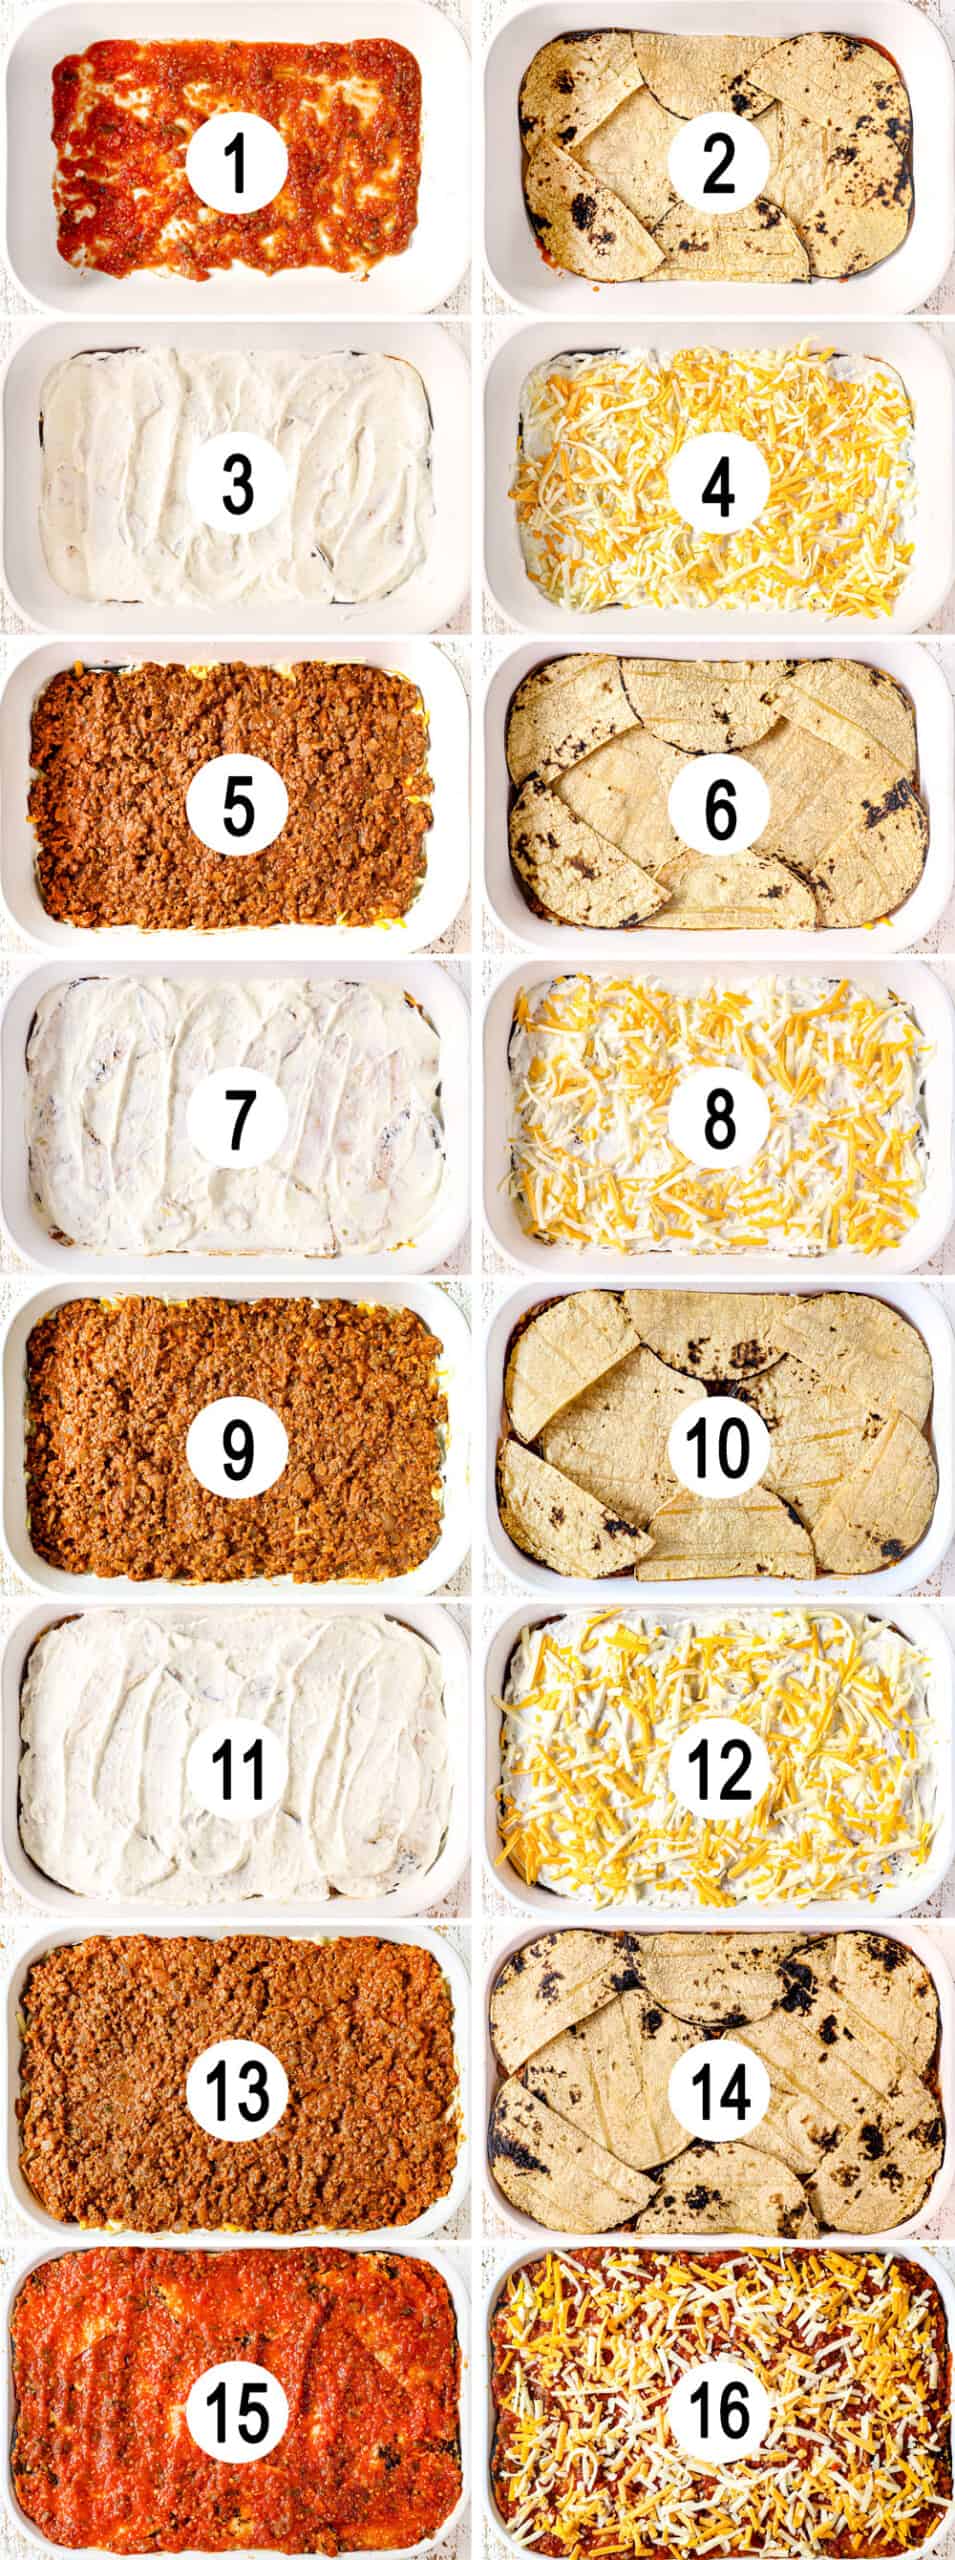 a collage showing how to make taco lasagna by showing how to layer each layer of salsa, tortillas, sour cream, cheese and ground beef